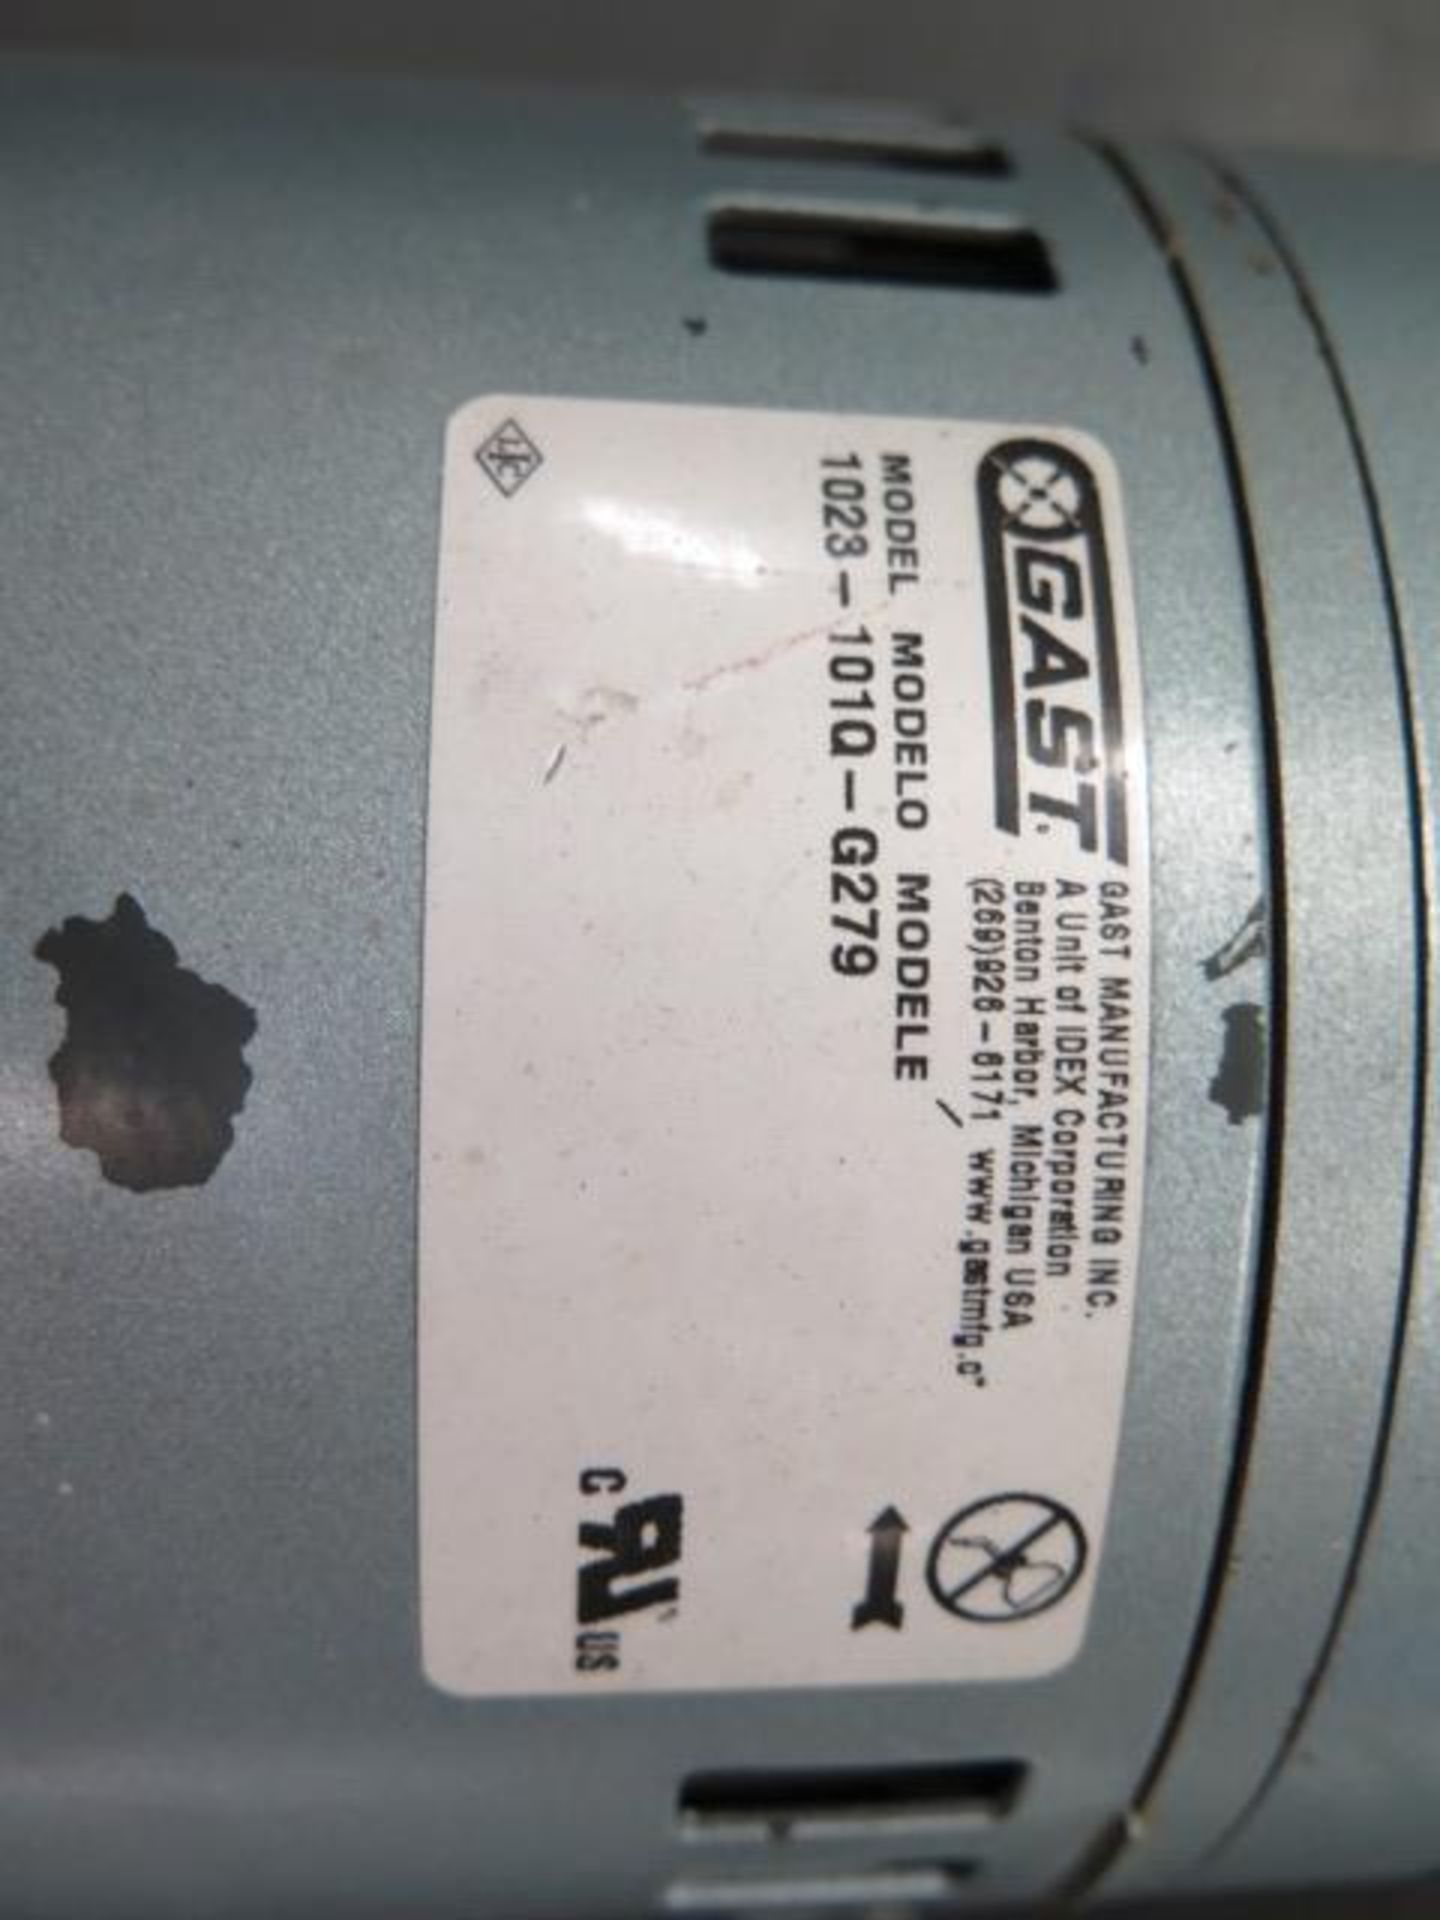 Gast mdl. 1023-101Q-G279 Vacuum Pumps (2) 3/4Hp 208-230/380-460V (SOLD AS-IS - NO WARRANTY) - Image 5 of 5